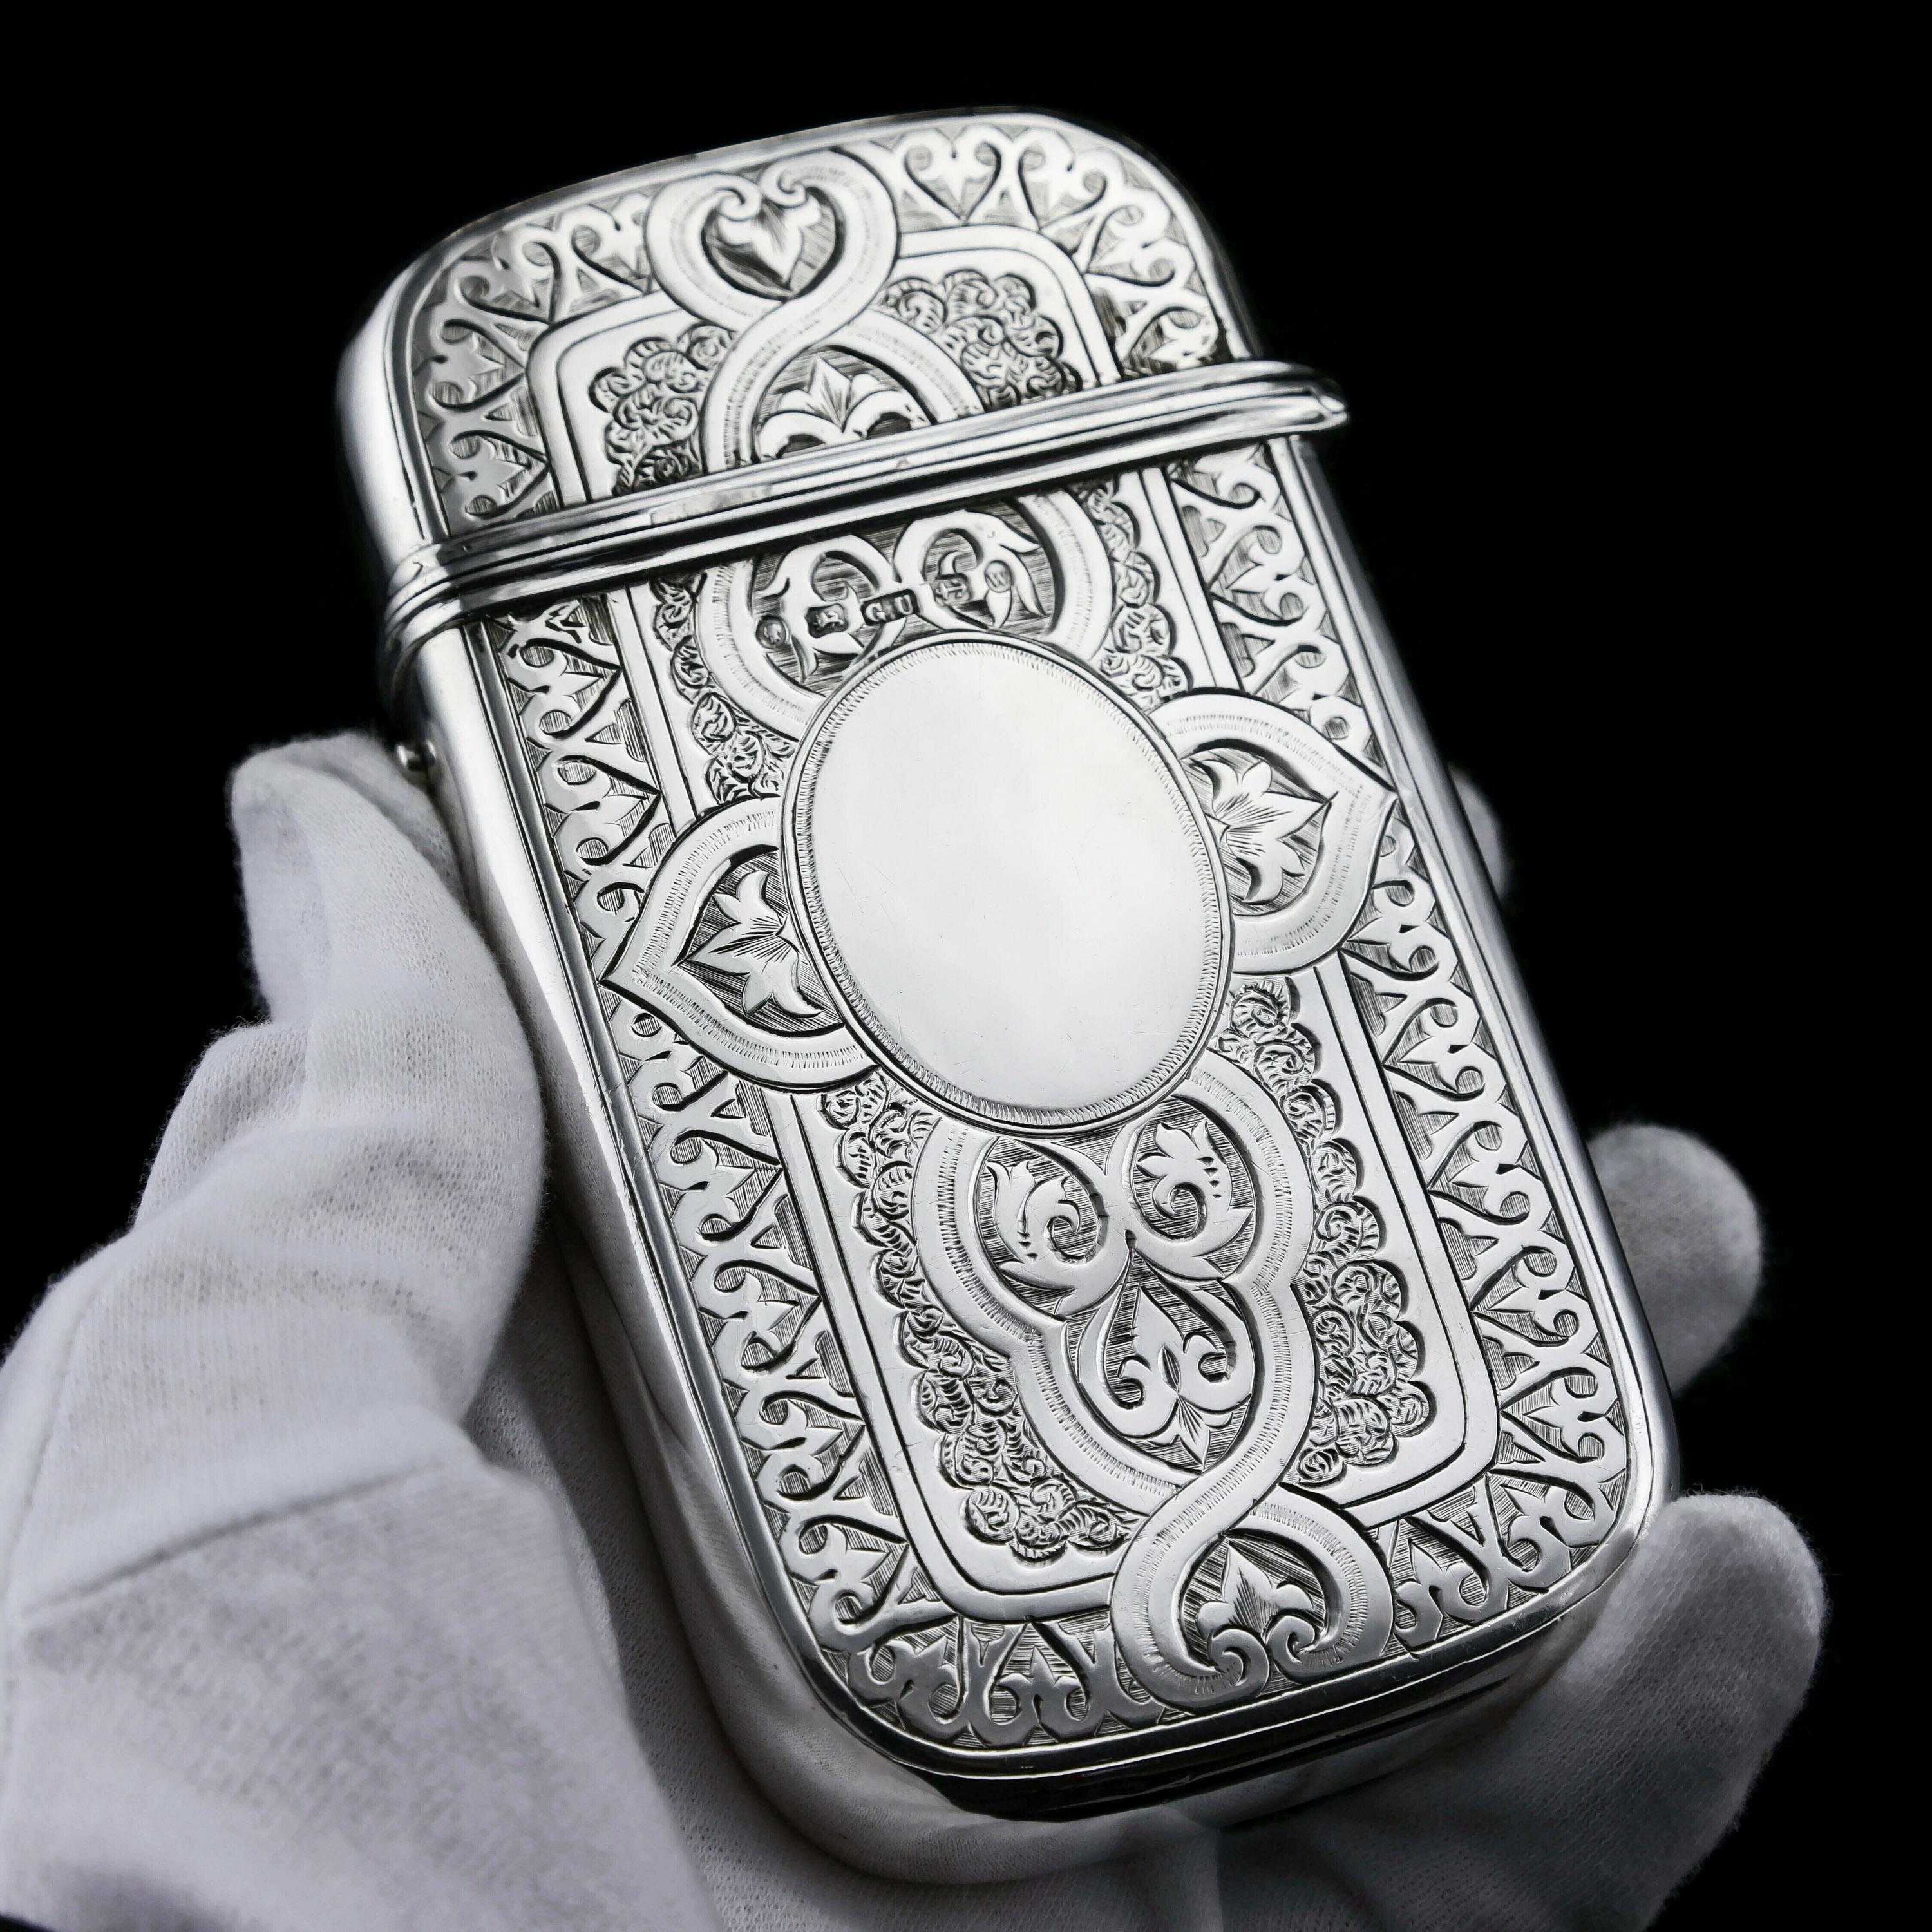 We are delighted to be able to offer this impressive large solid sterling silver cheroot/cigar case made by silversmith George Unite of Birmingham in 1871.
 
The unusually large and impressive size of the case is most certainly one of the first